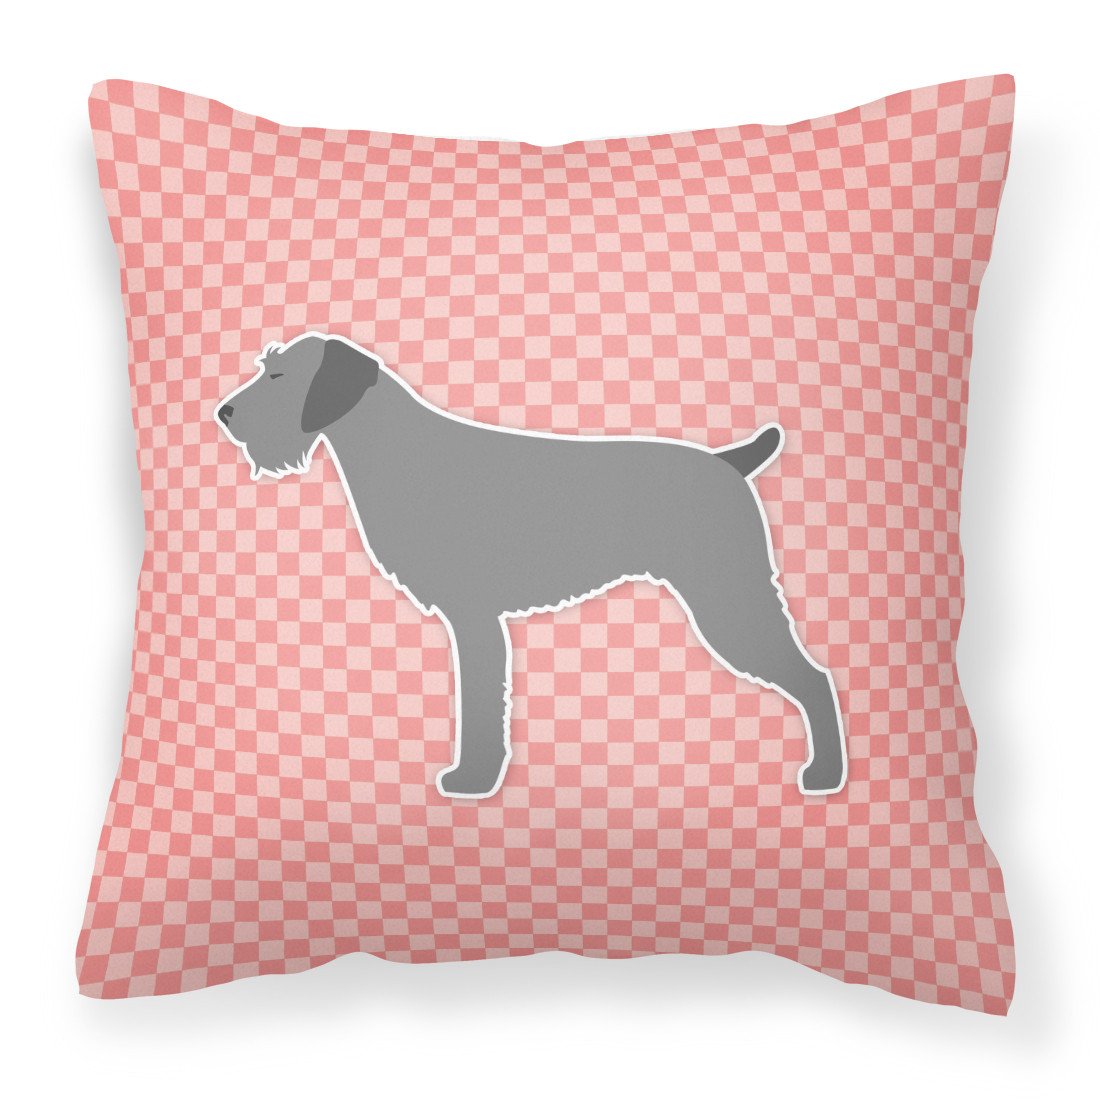 German Wirehaired Pointer Checkerboard Pink Fabric Decorative Pillow BB3611PW1818 by Caroline's Treasures